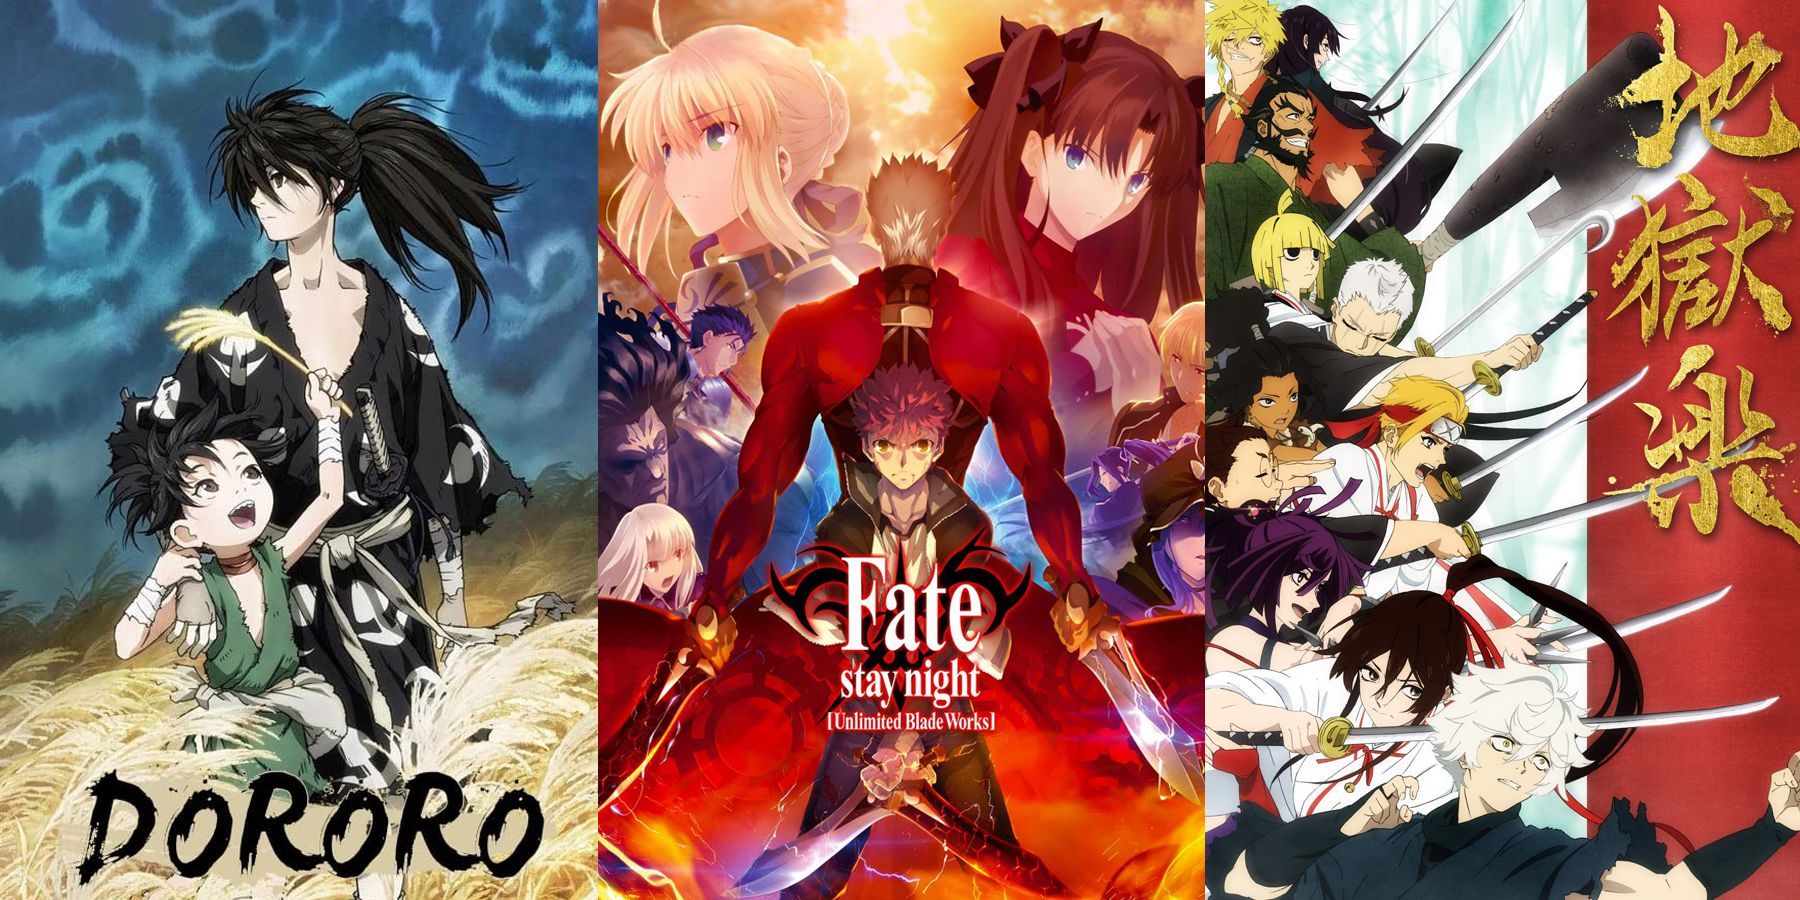 Dororo Fate Stay Night Hells Paradise Poster